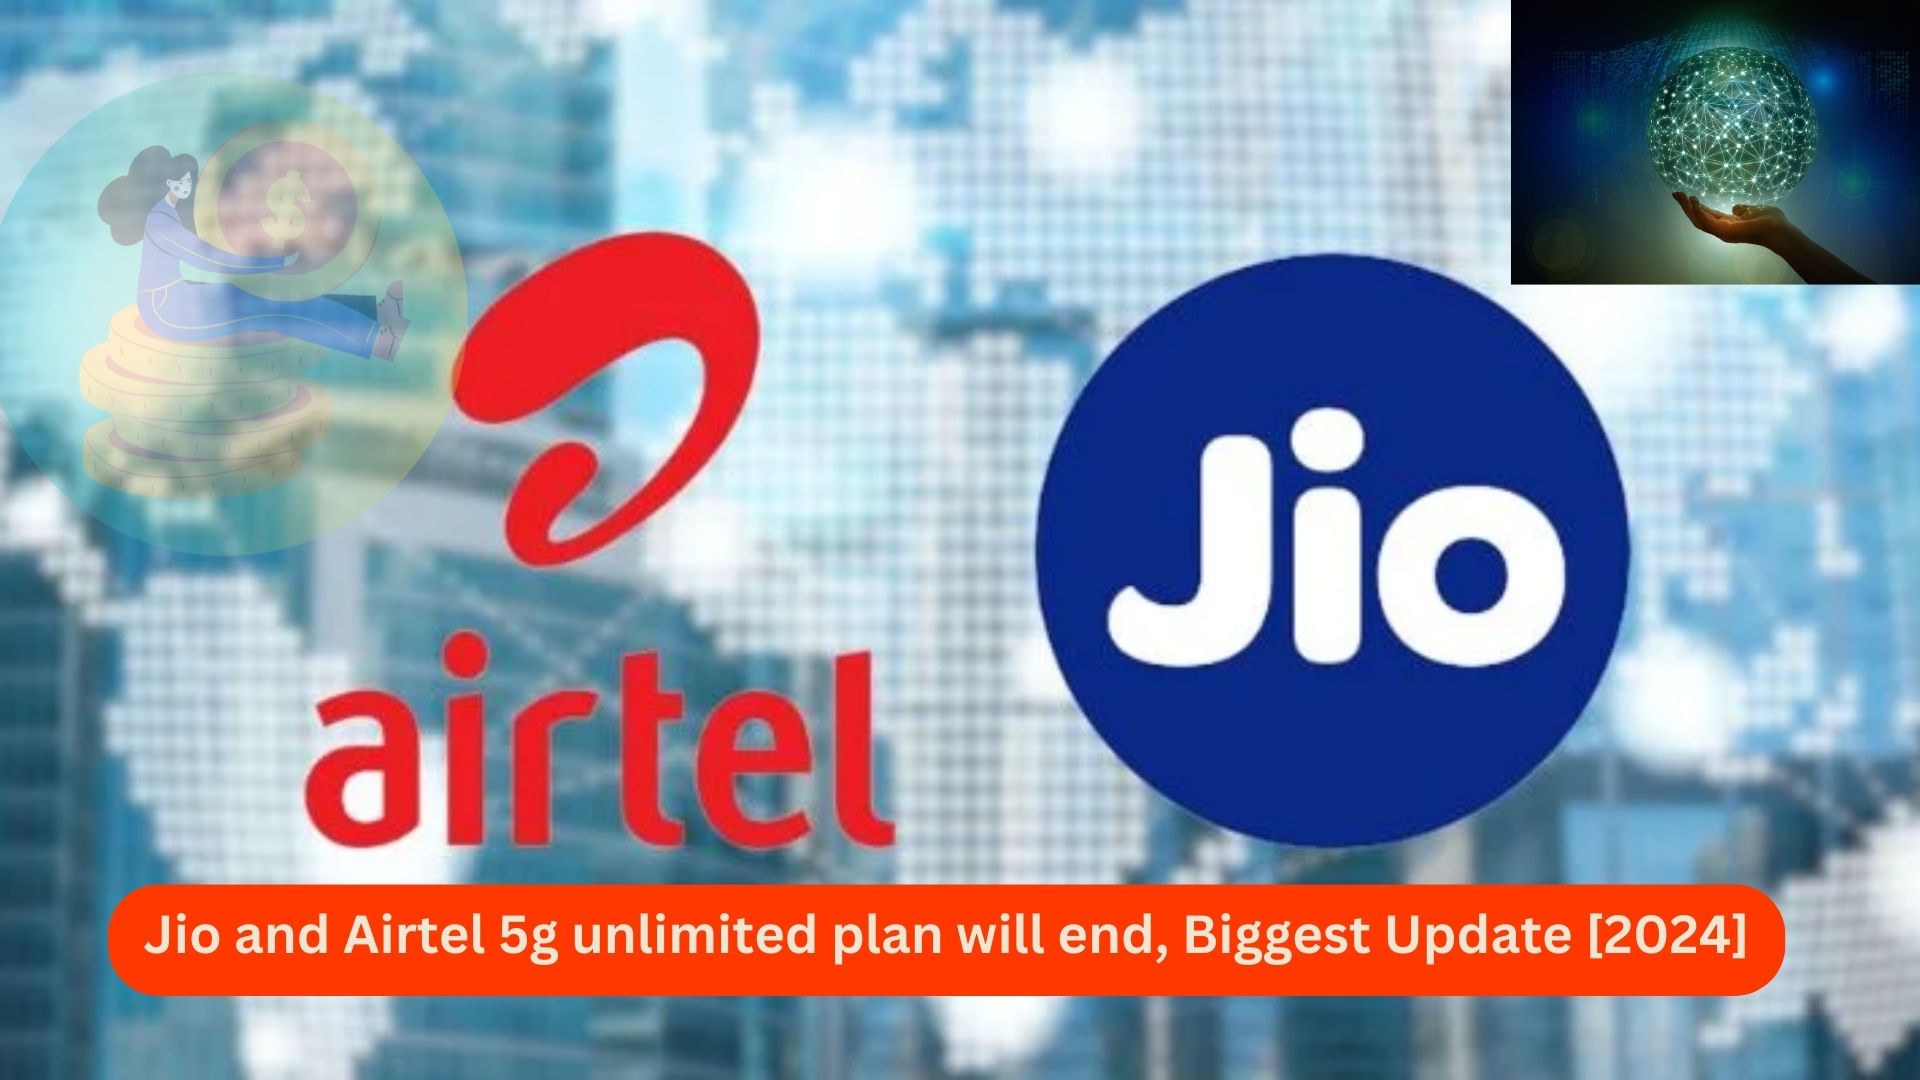 Jio and Airtel 5g unlimited plan will end, Biggest Update [2024]